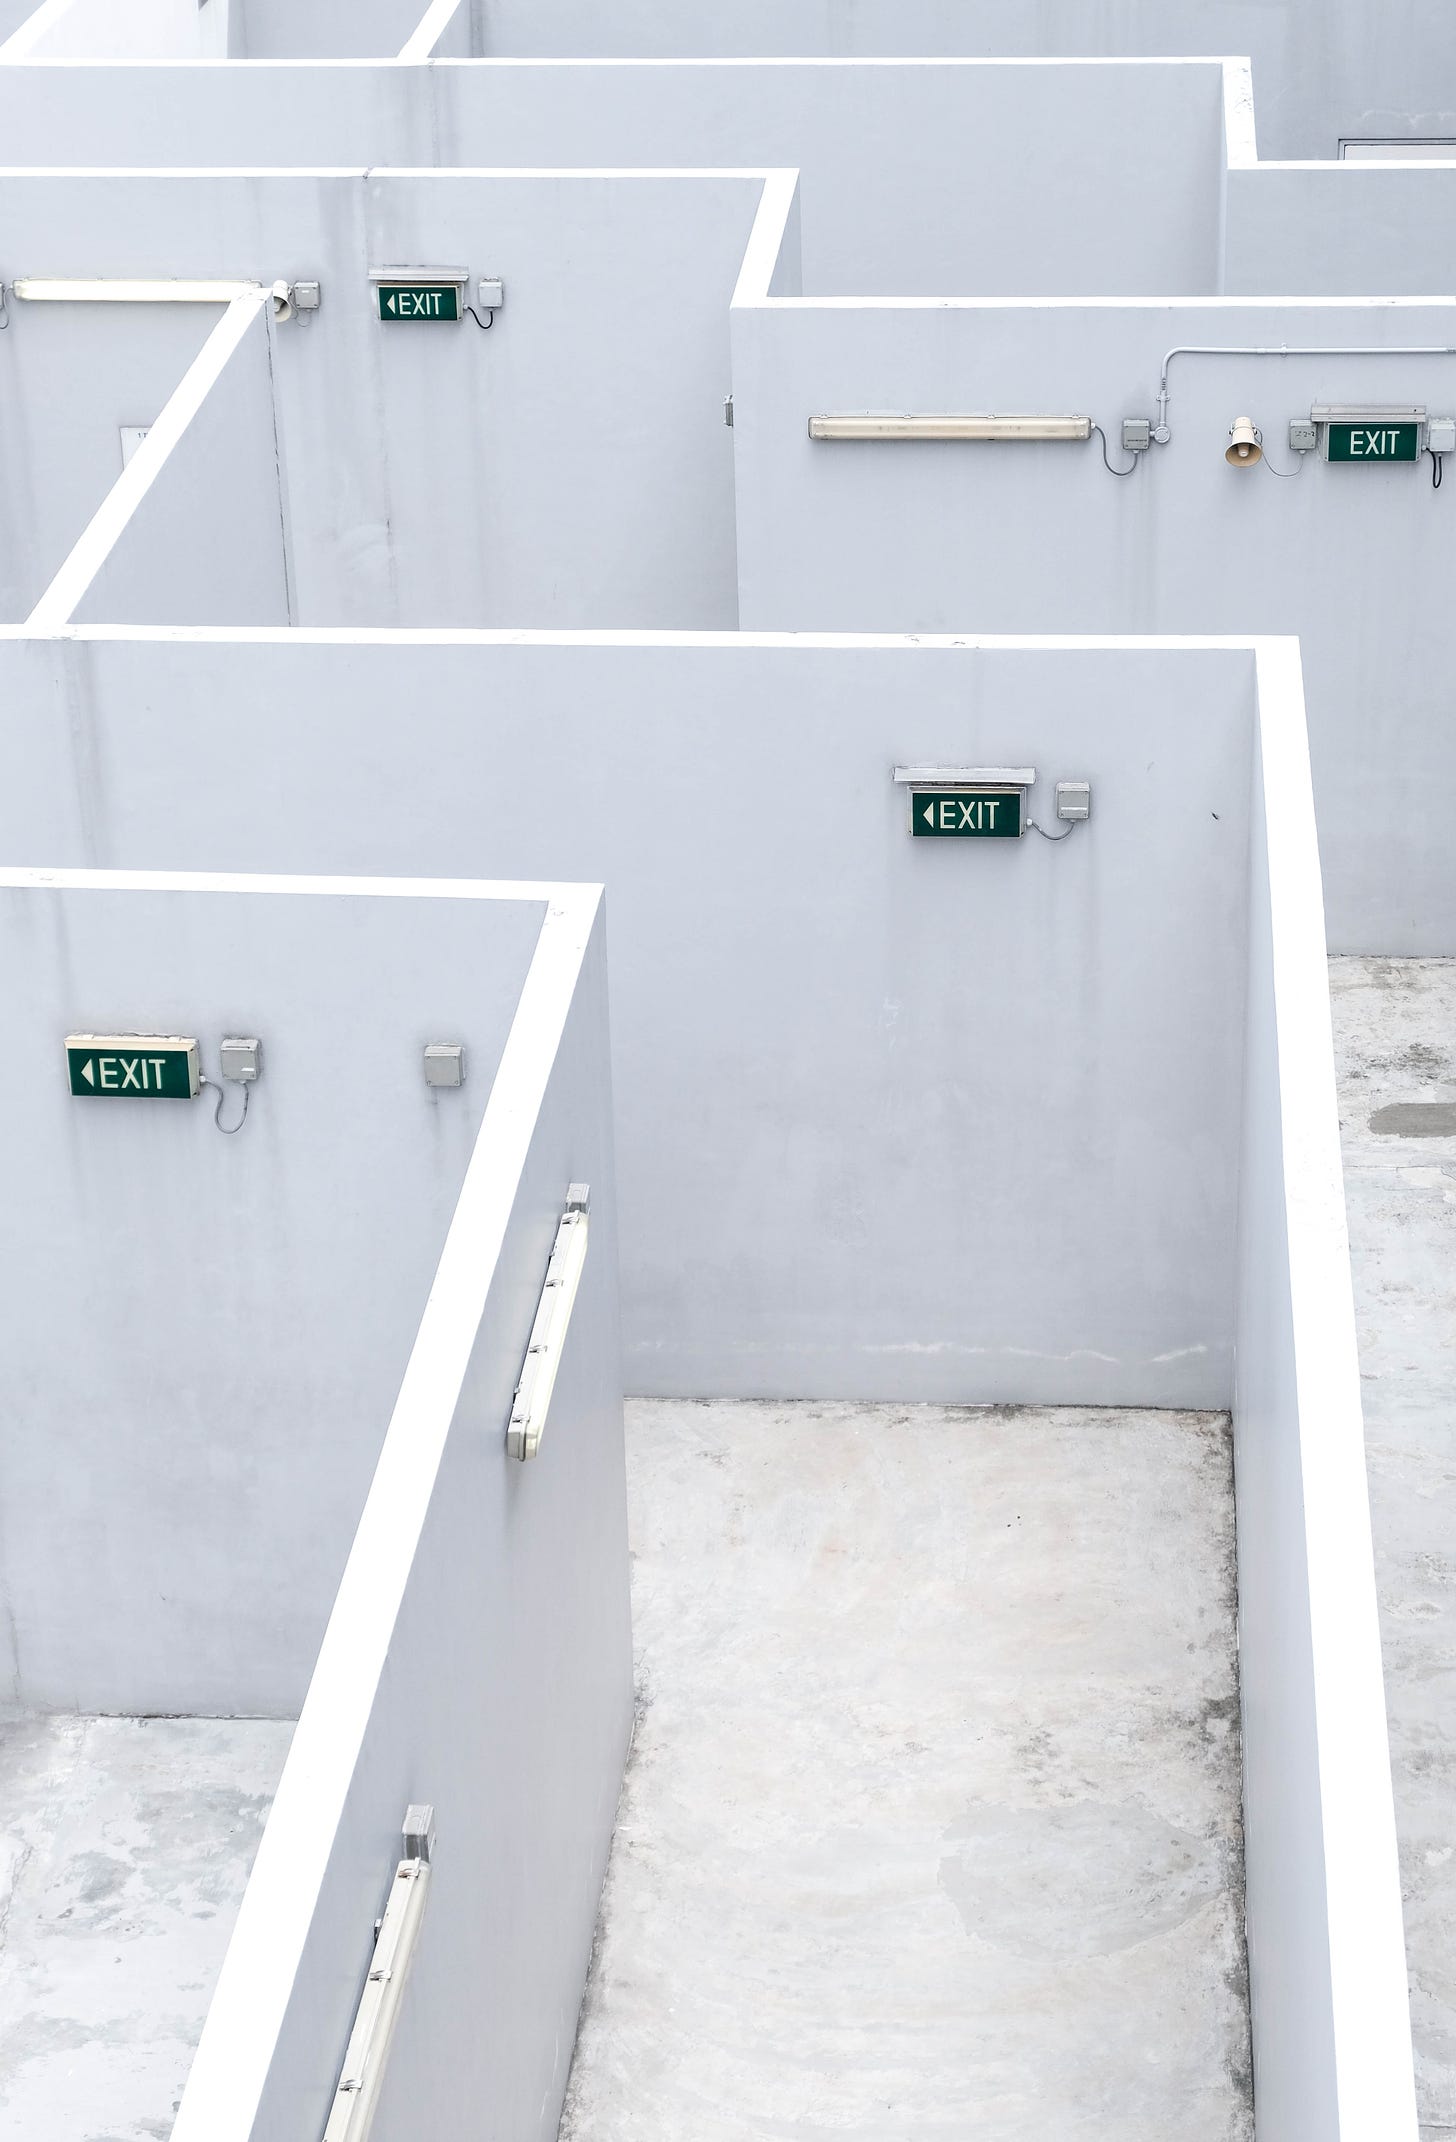 Photo of a maze with white walls and several green exit signs